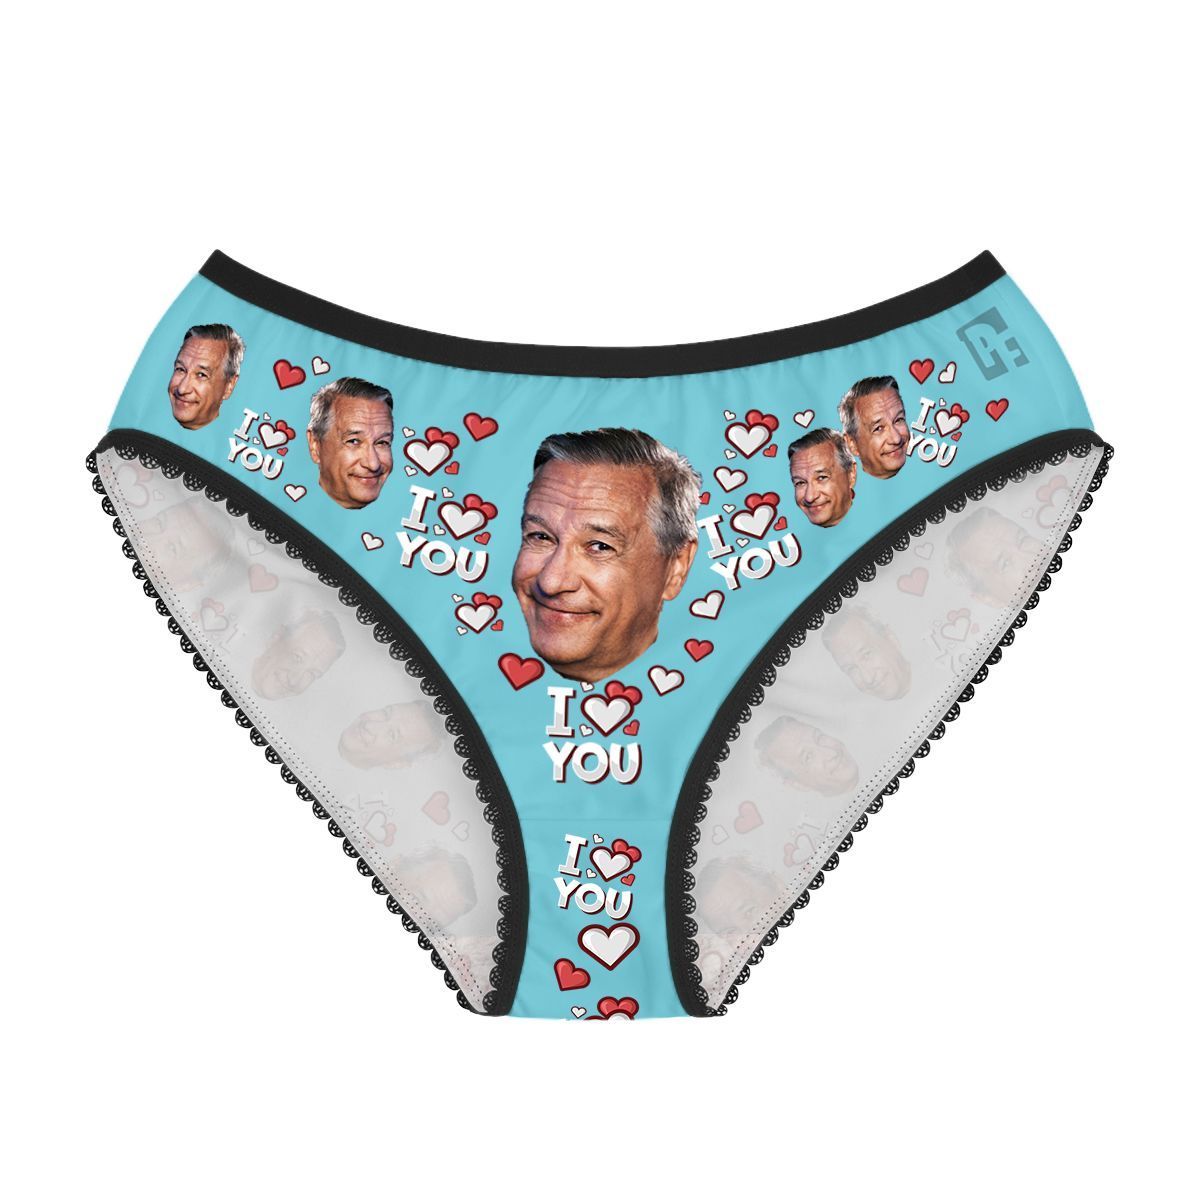 Blue I love you women's underwear briefs personalized with photo printed on them